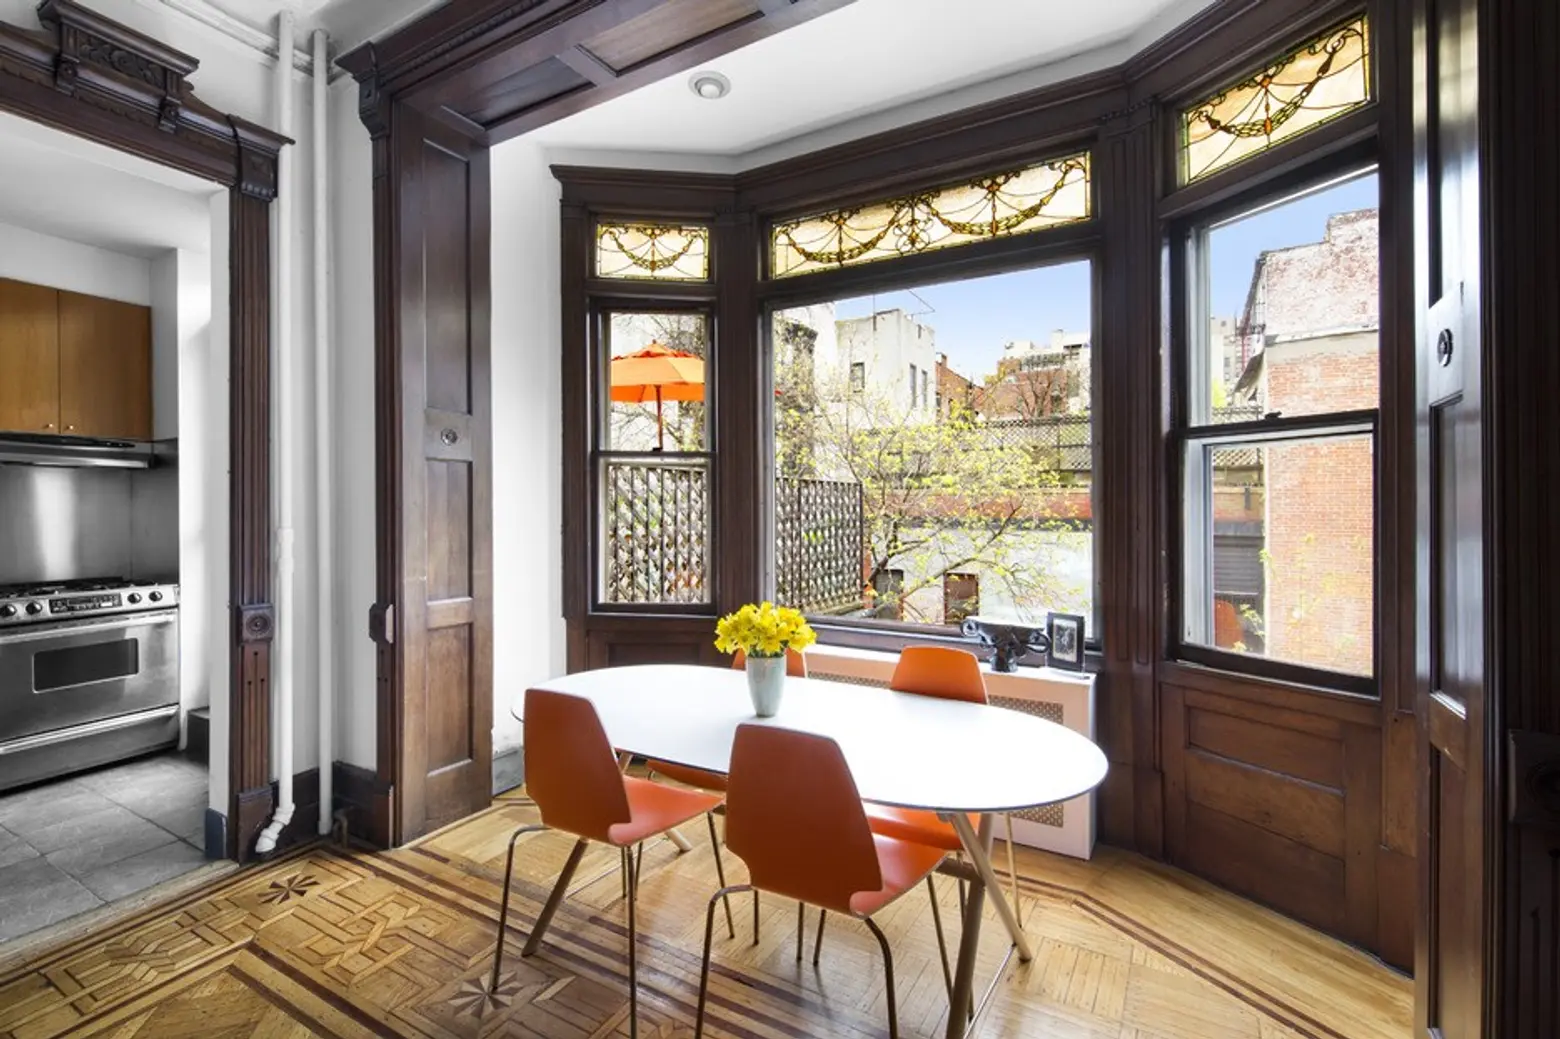 $1.095M duplex in a Park Slope brownstone boasts intricate stained glass and inlaid wood floors